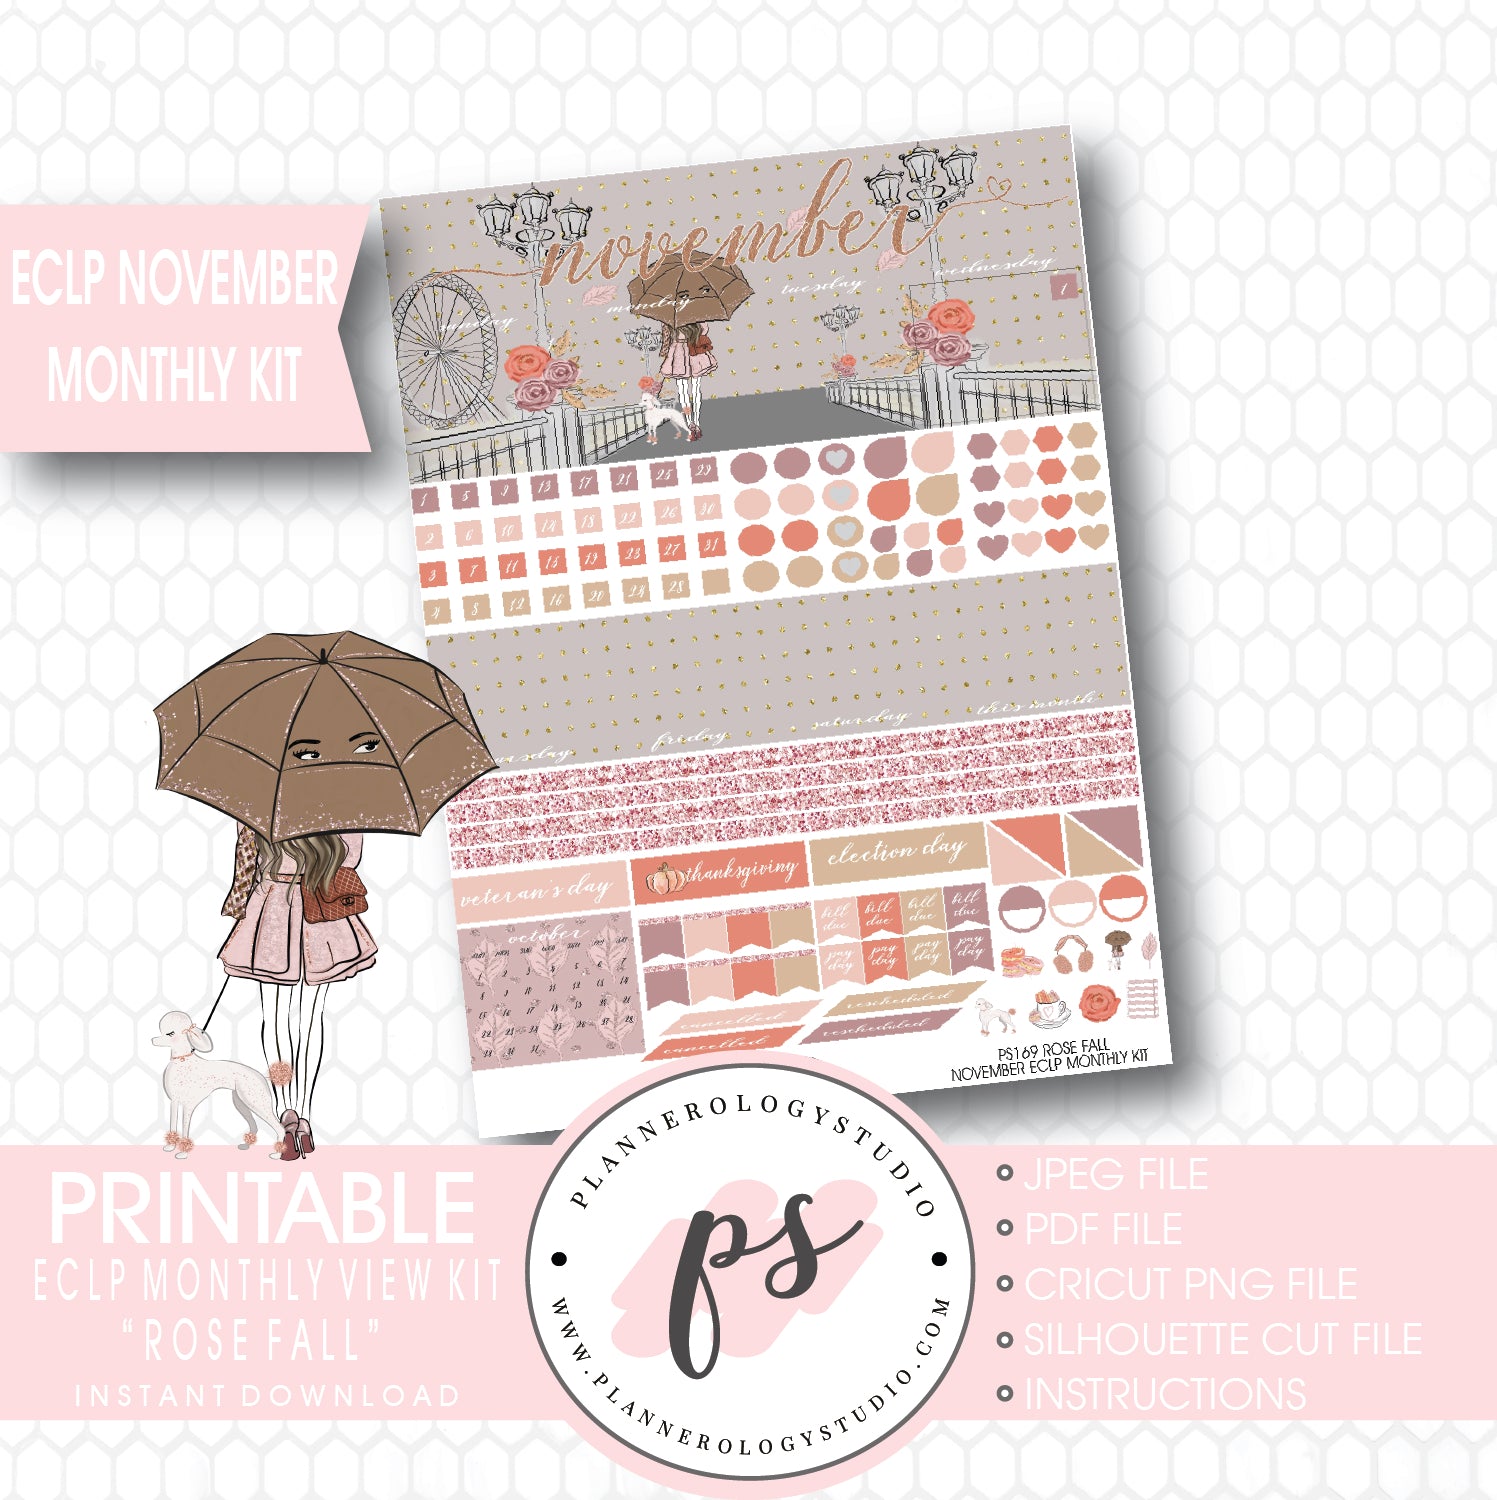 Rose Fall November 2017 Monthly View Kit Printable Planner Stickers (for use with ECLP) - Plannerologystudio